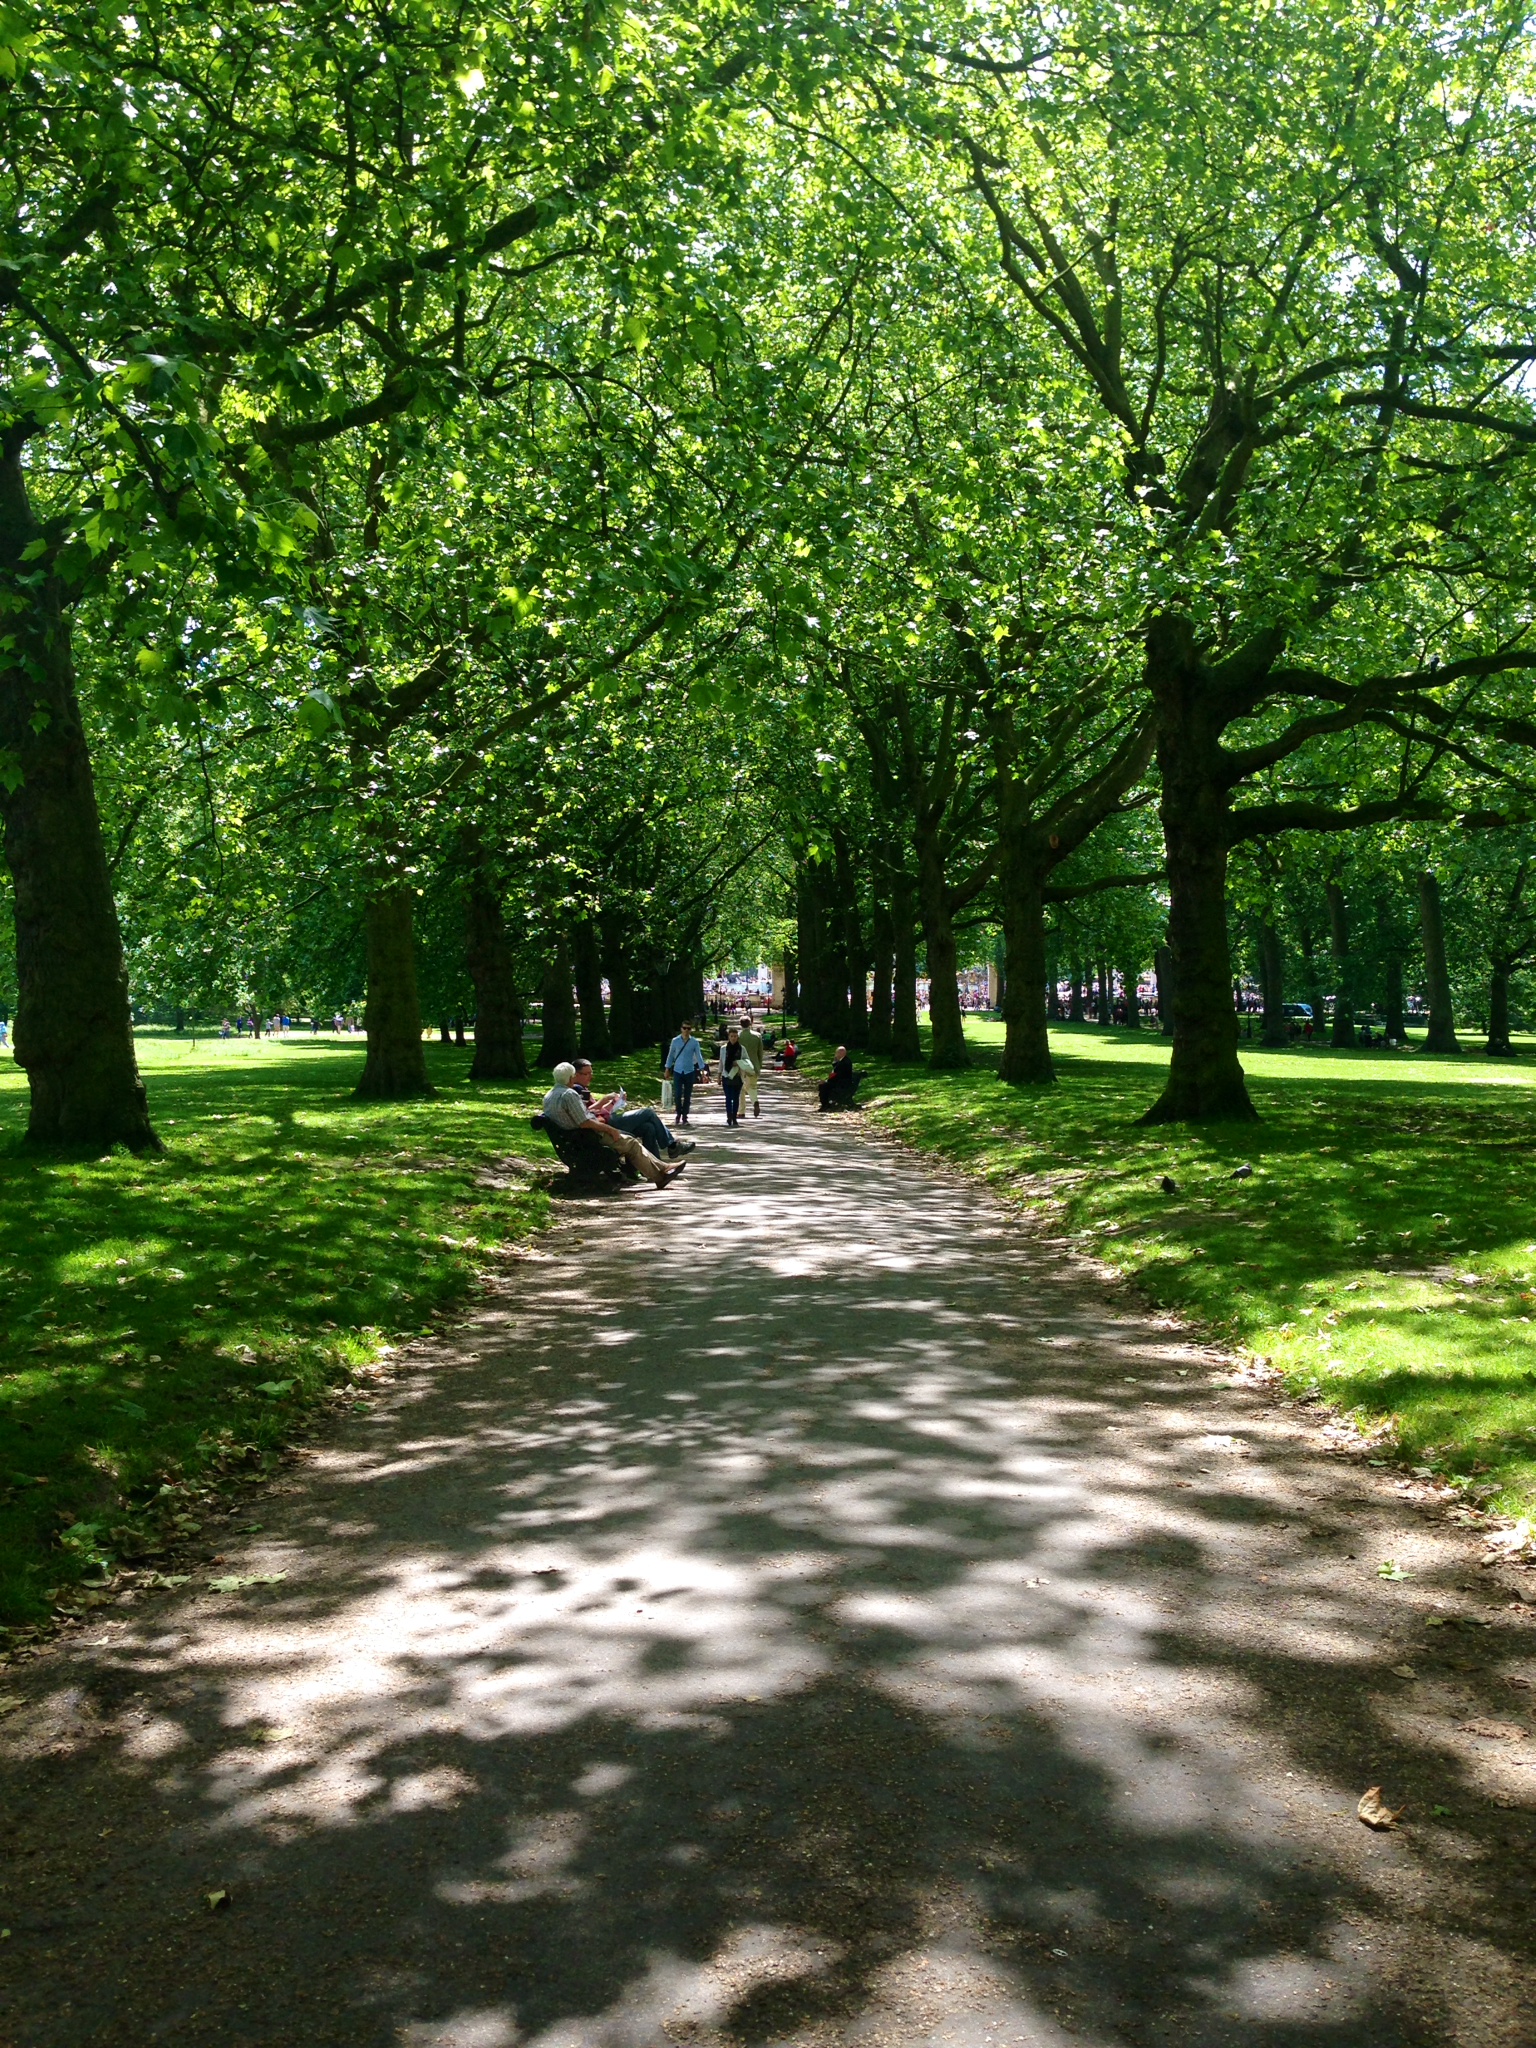 Green Park living up to its name